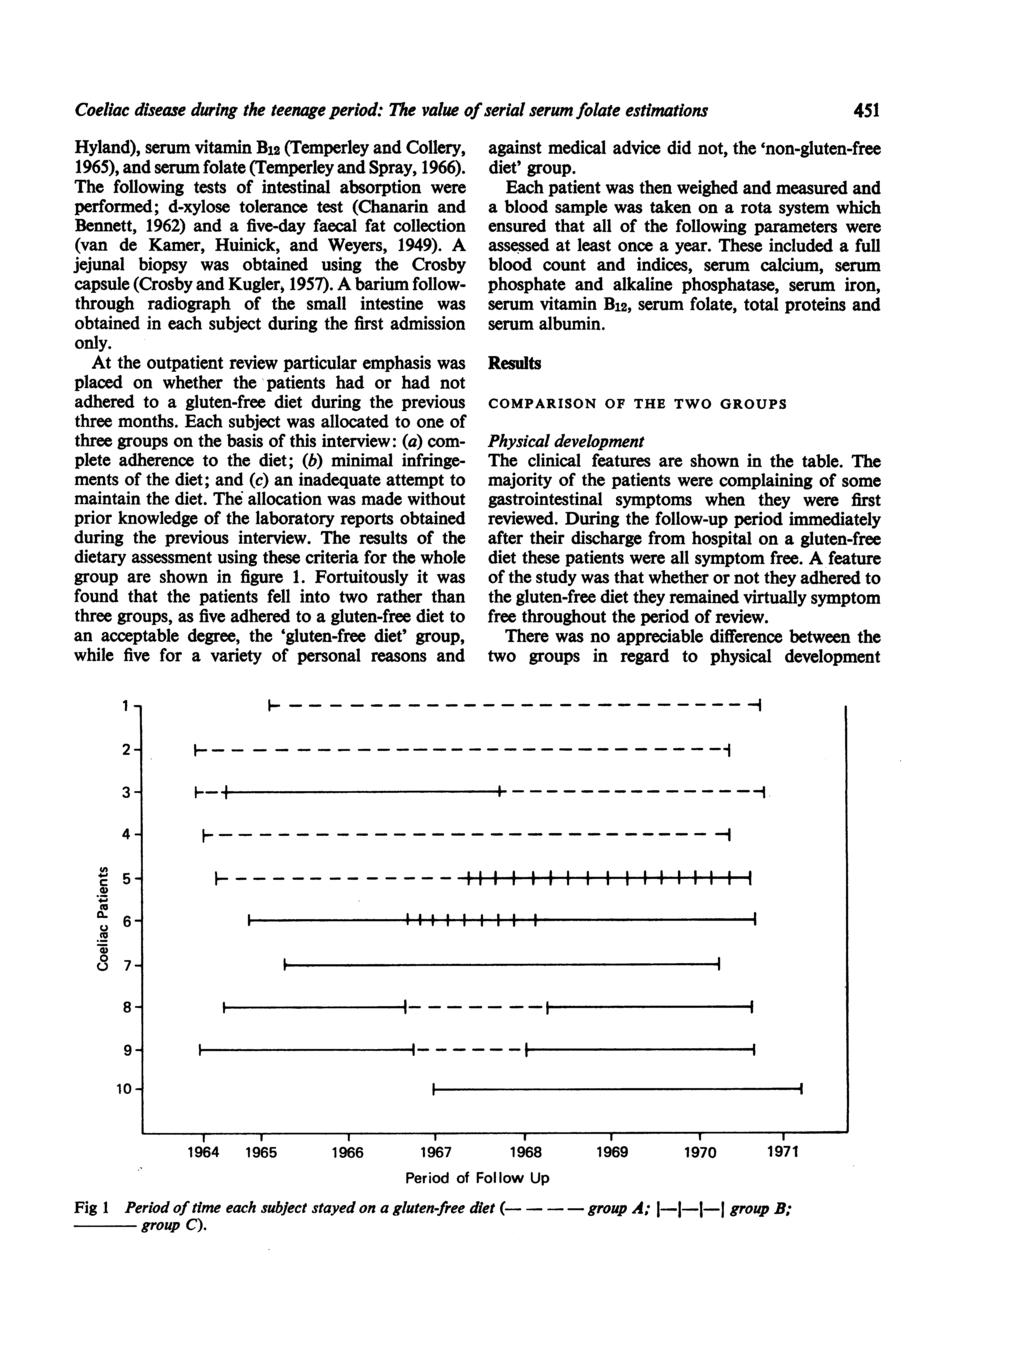 Coeliac disease during the teenage period: The value ofserial serum folate estimations Hyland), serum vitamin B12 (Temperley and Collery, 1965), and serum folate (Temperley and Spray, 1966).